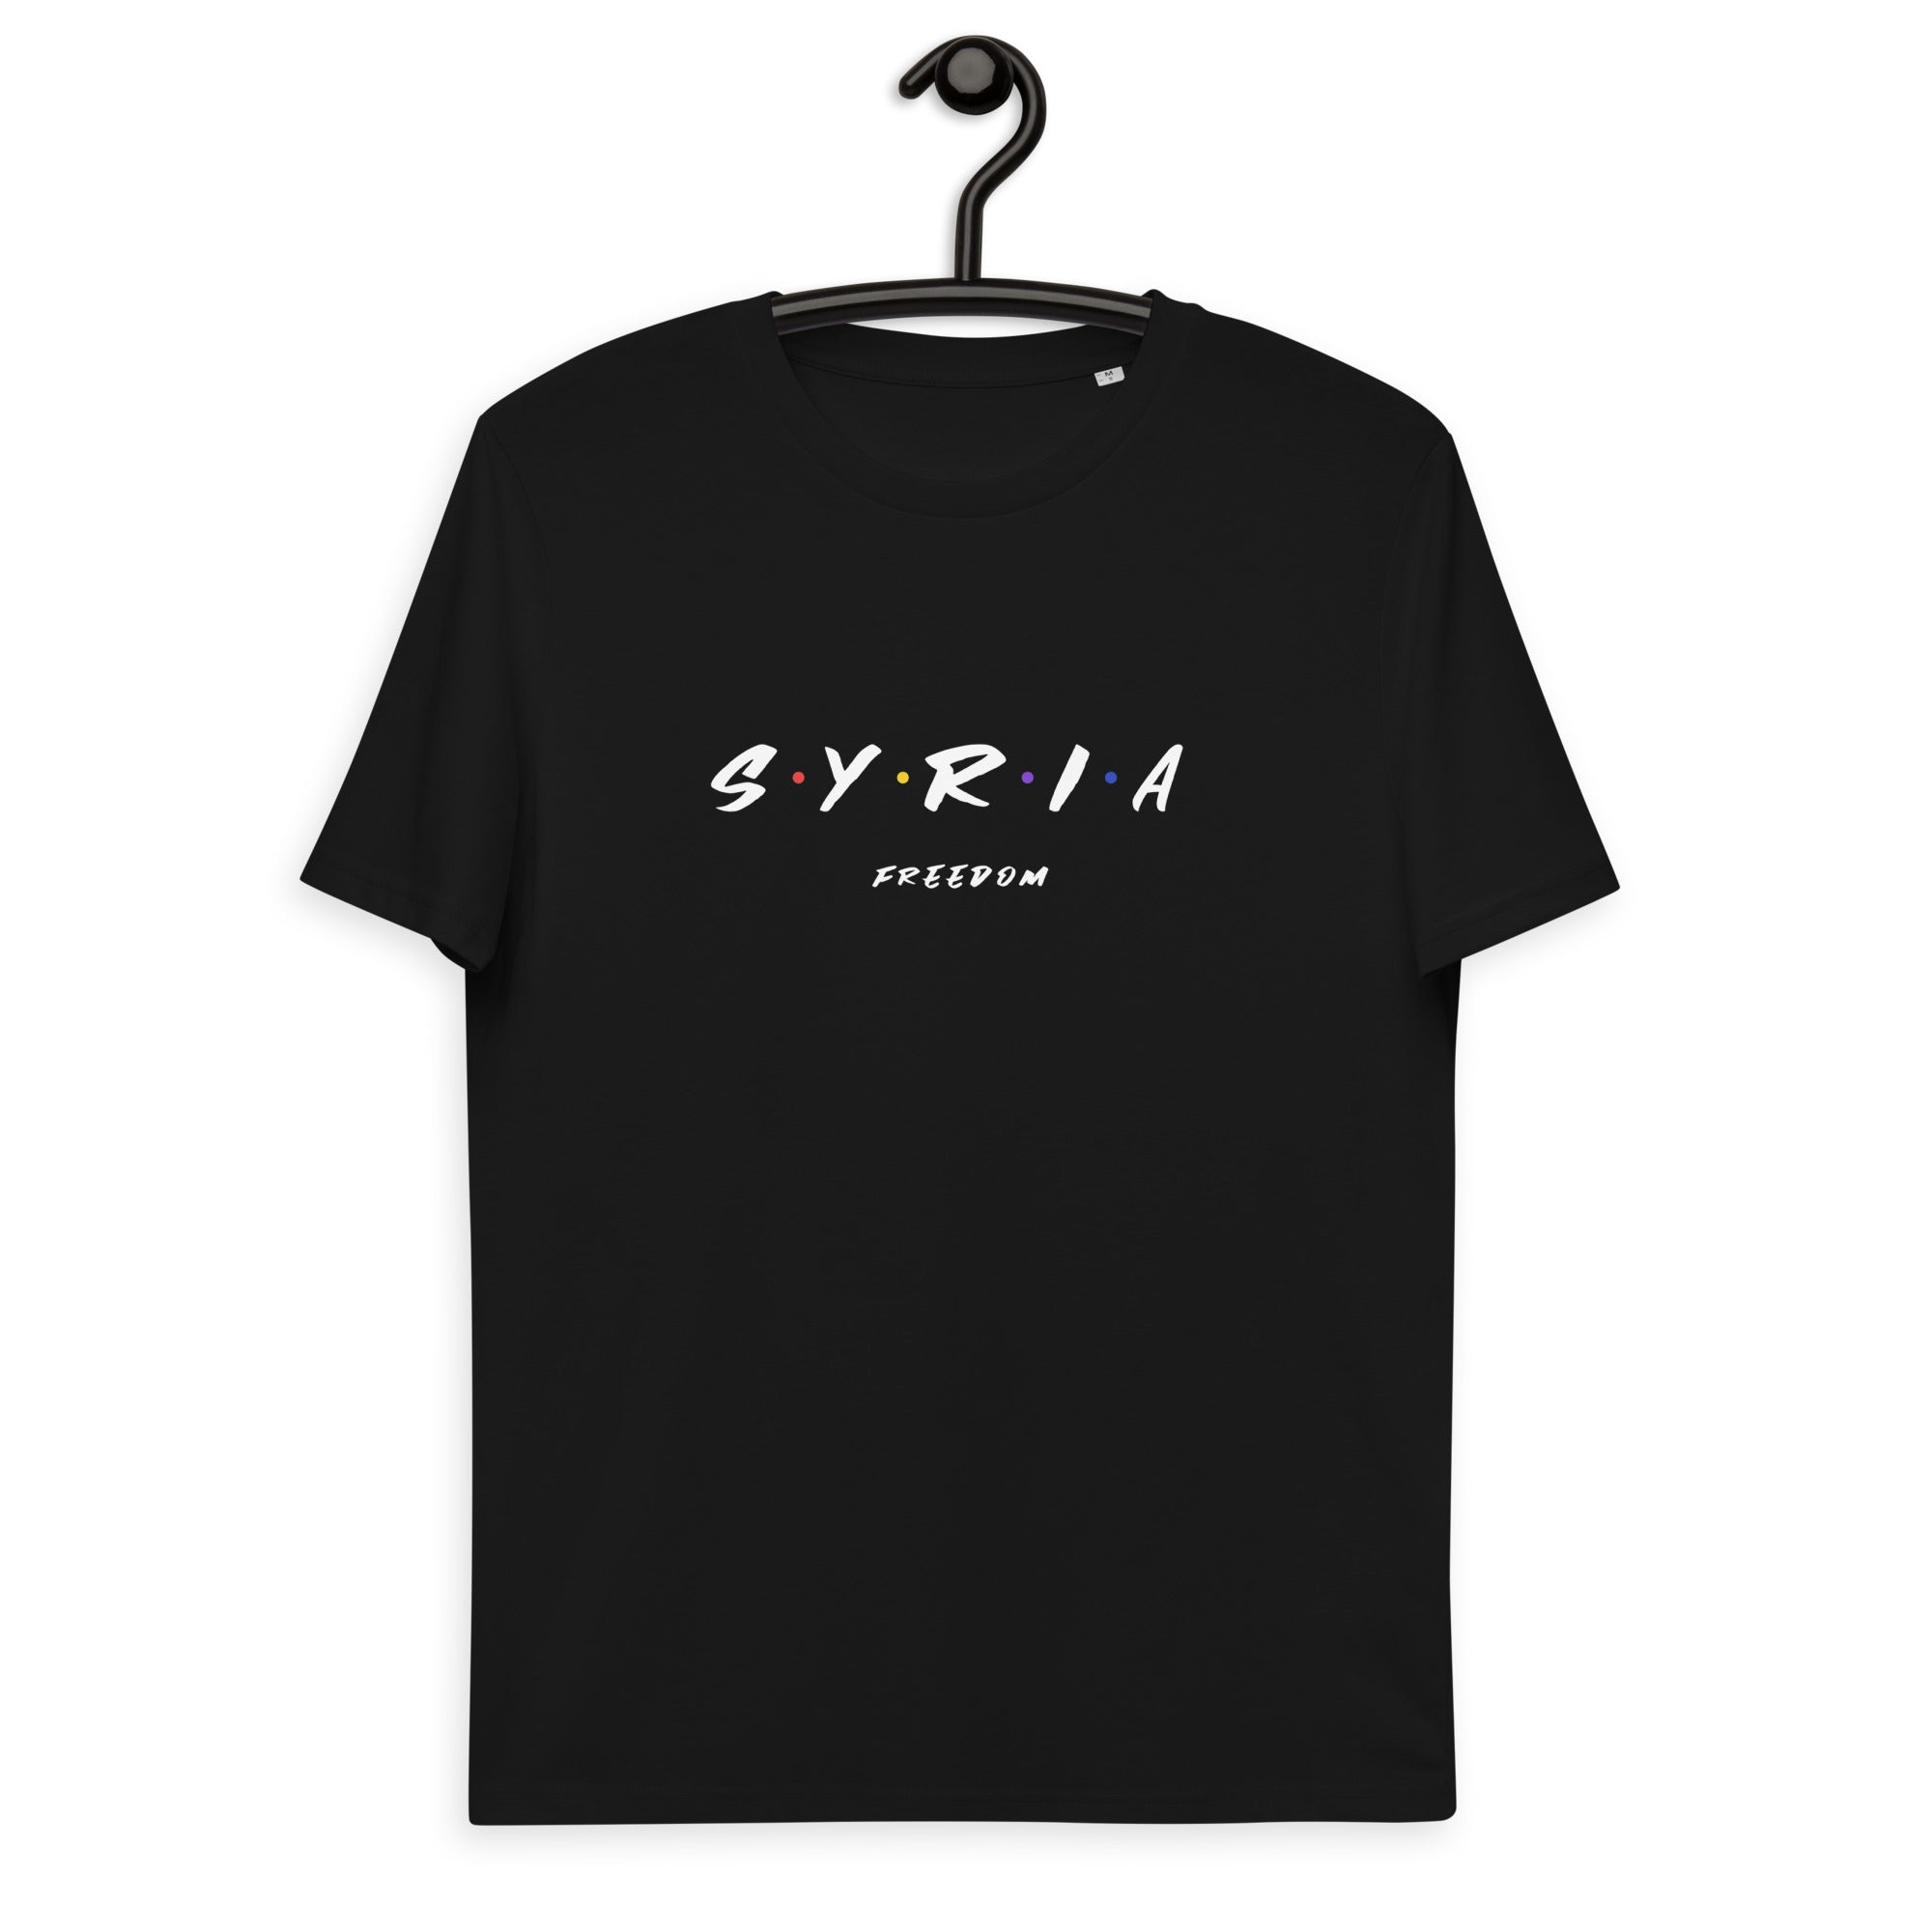 Syria (friends style) - t-shirt